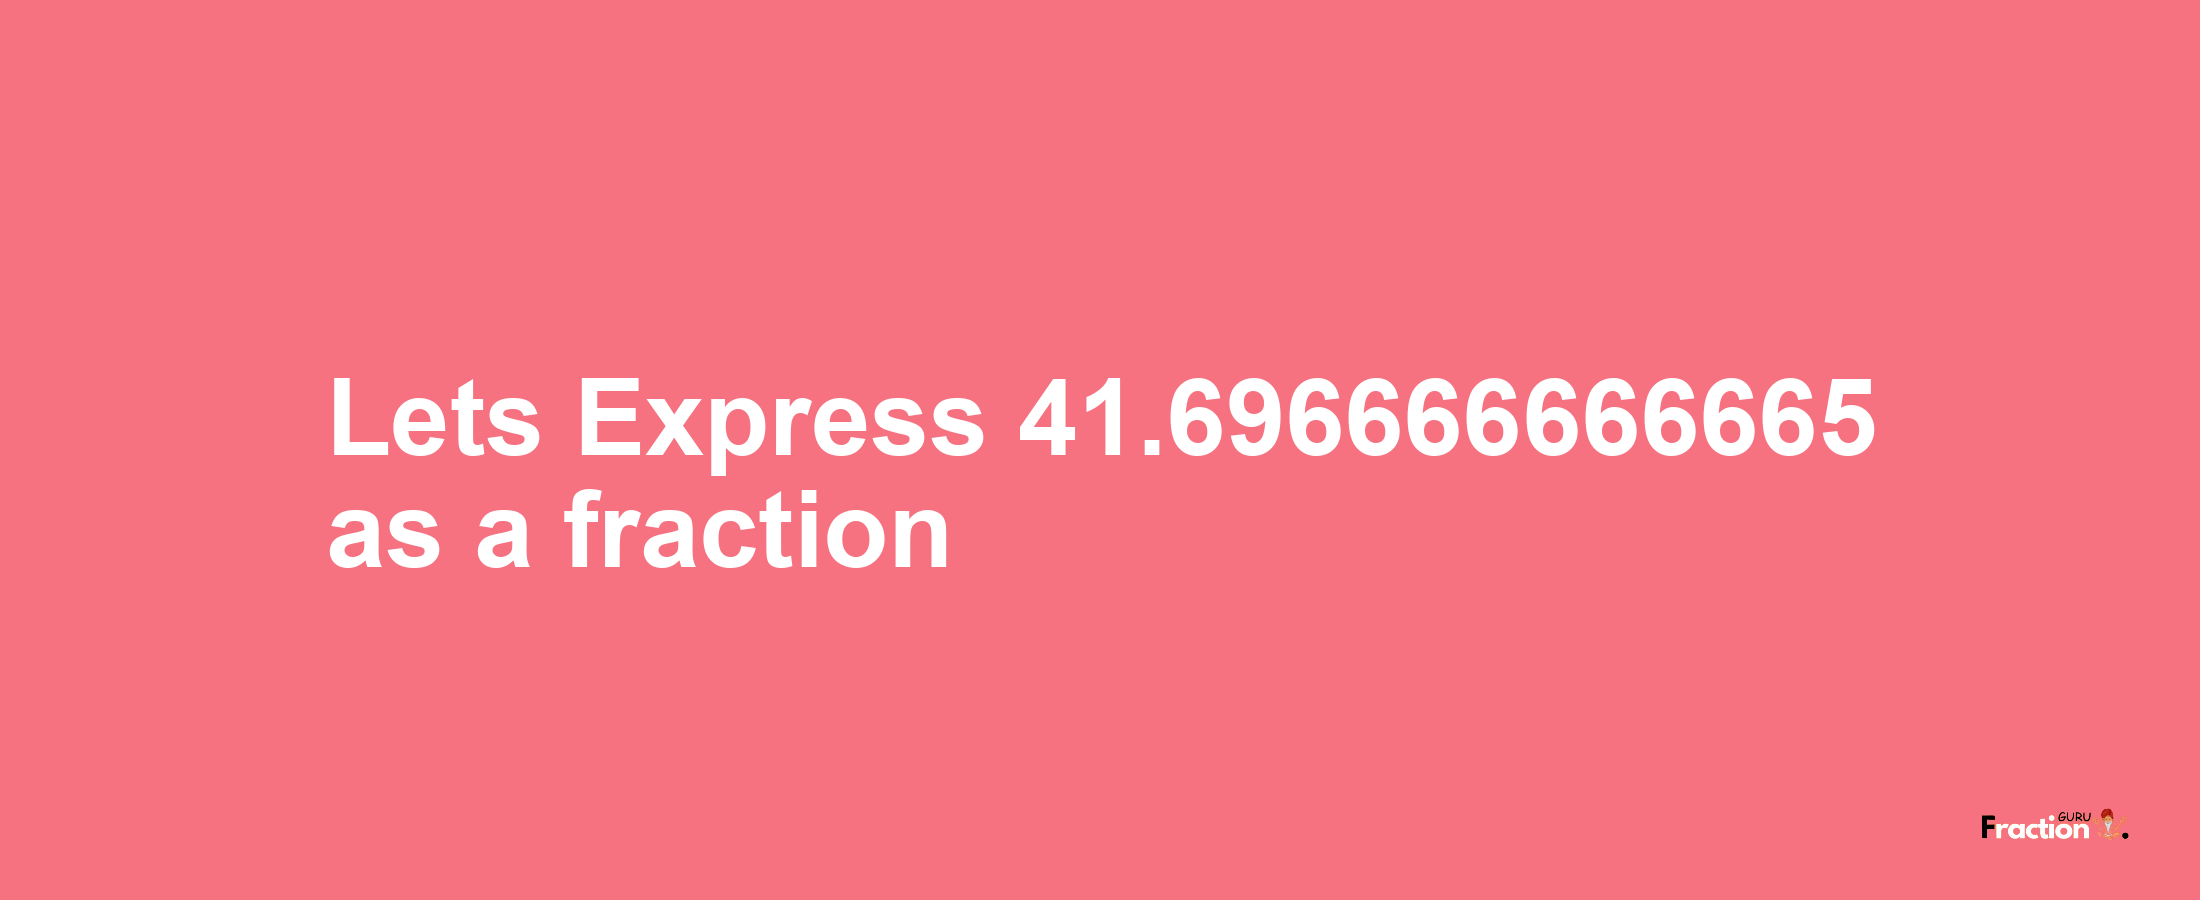 Lets Express 41.696666666665 as afraction